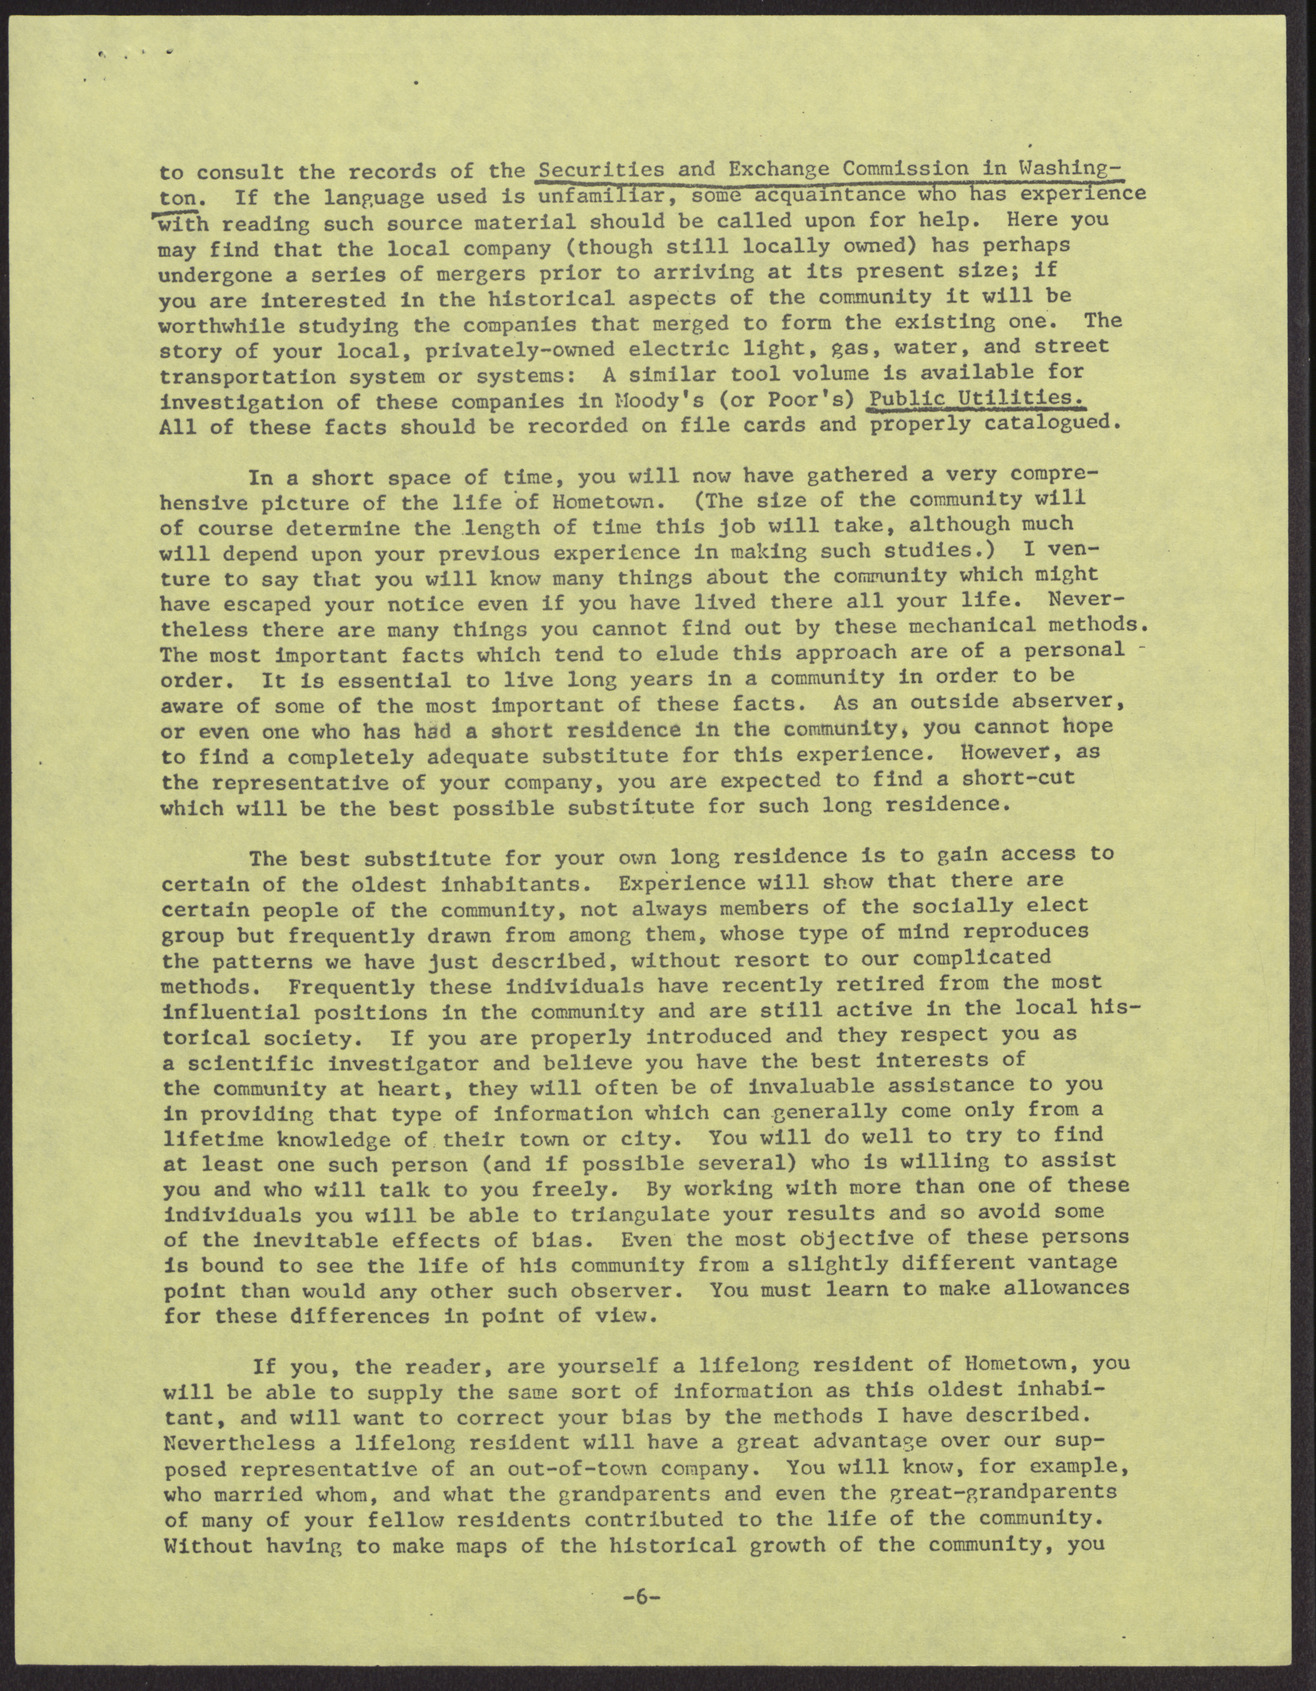 "Suggestions for a Study of Your Hometown," by Robert K. Lamb (7 pages), 1952, page 6